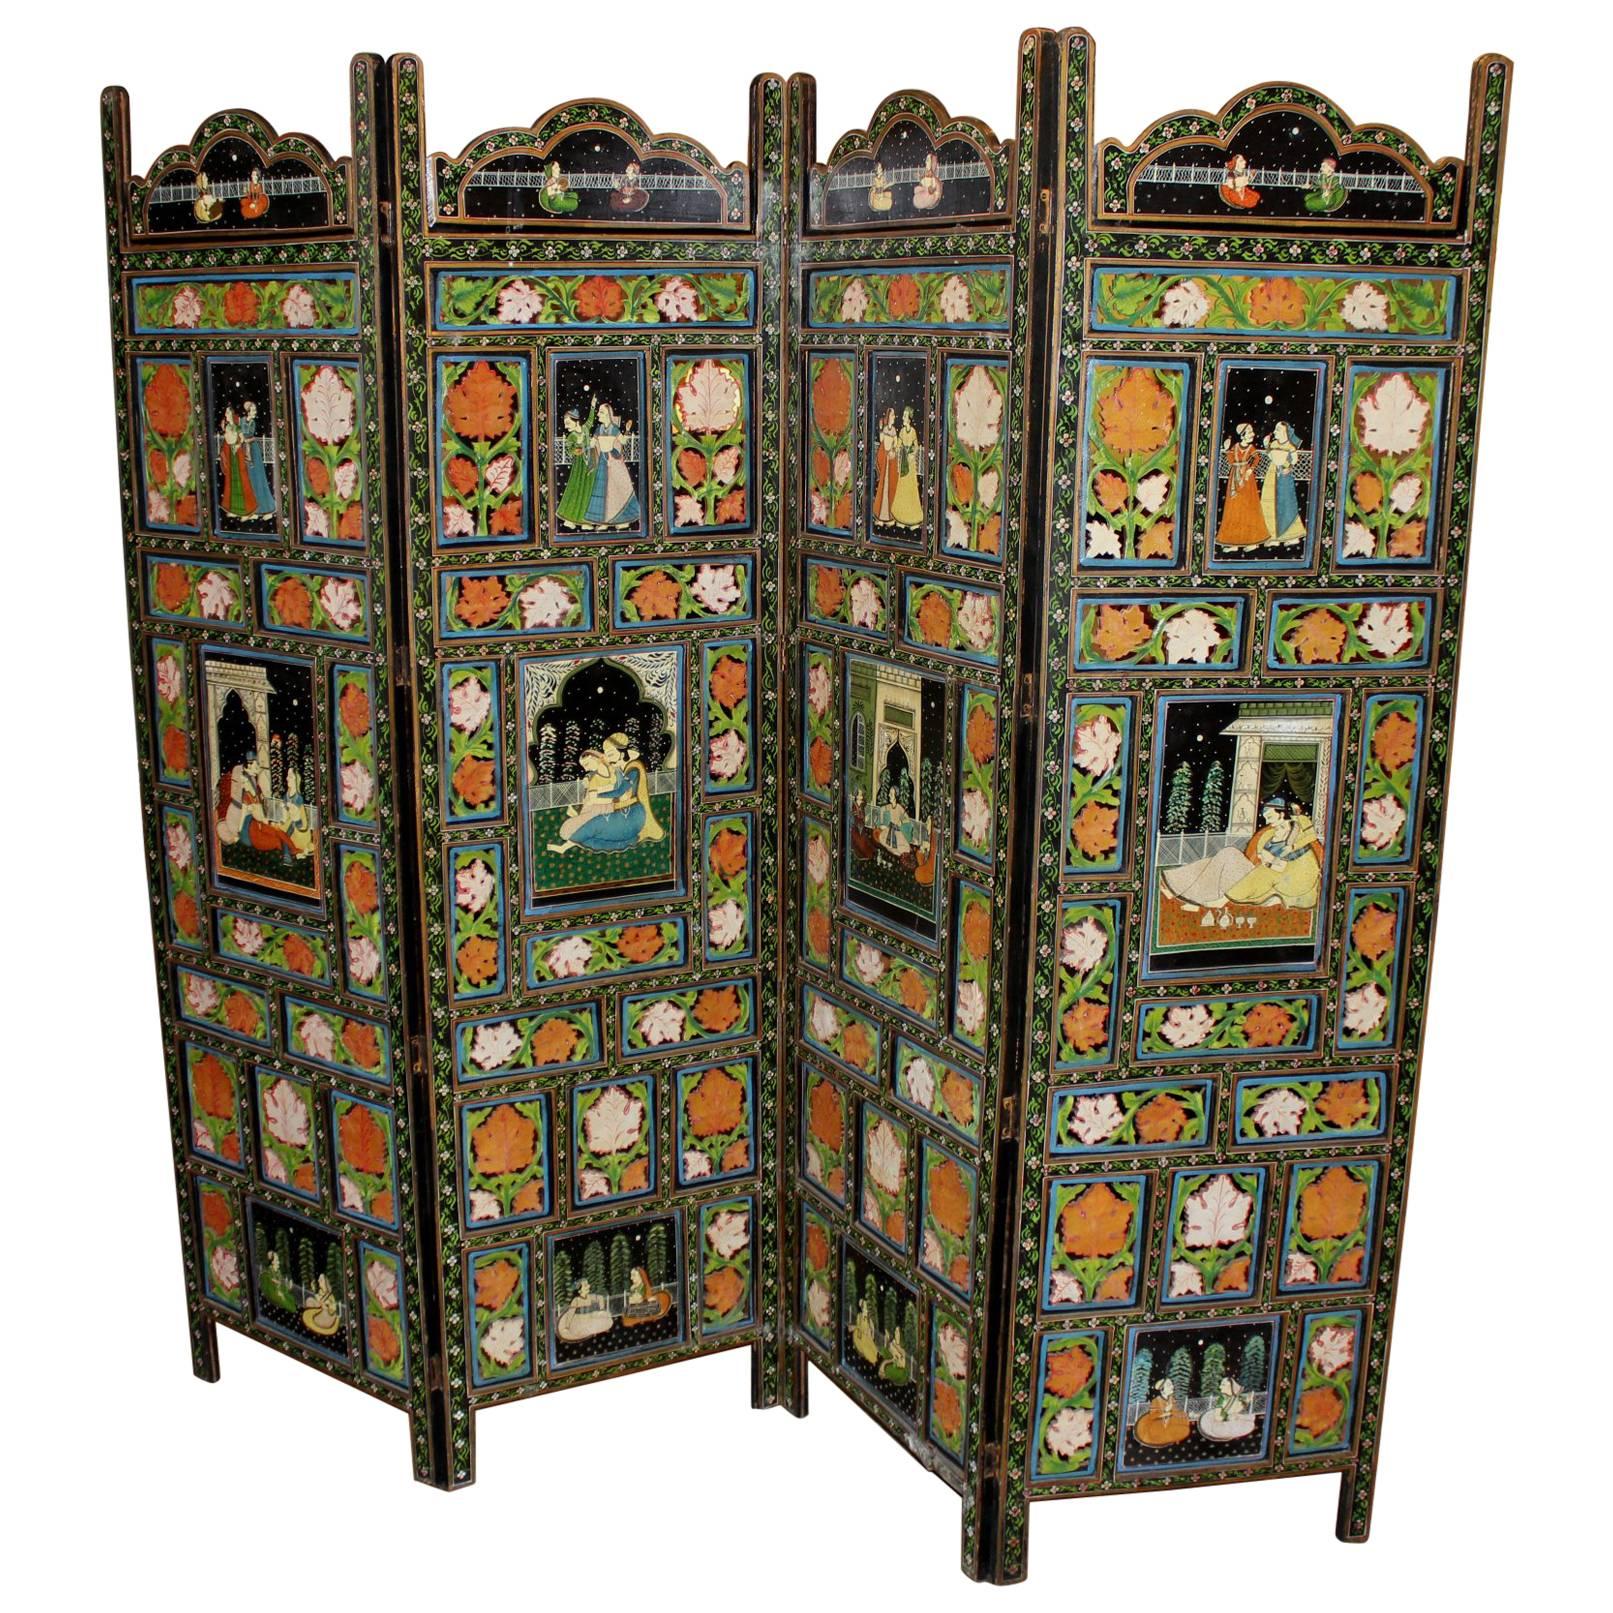 Four Panel Polychrome Hand-Painted Indian Dressing Screen